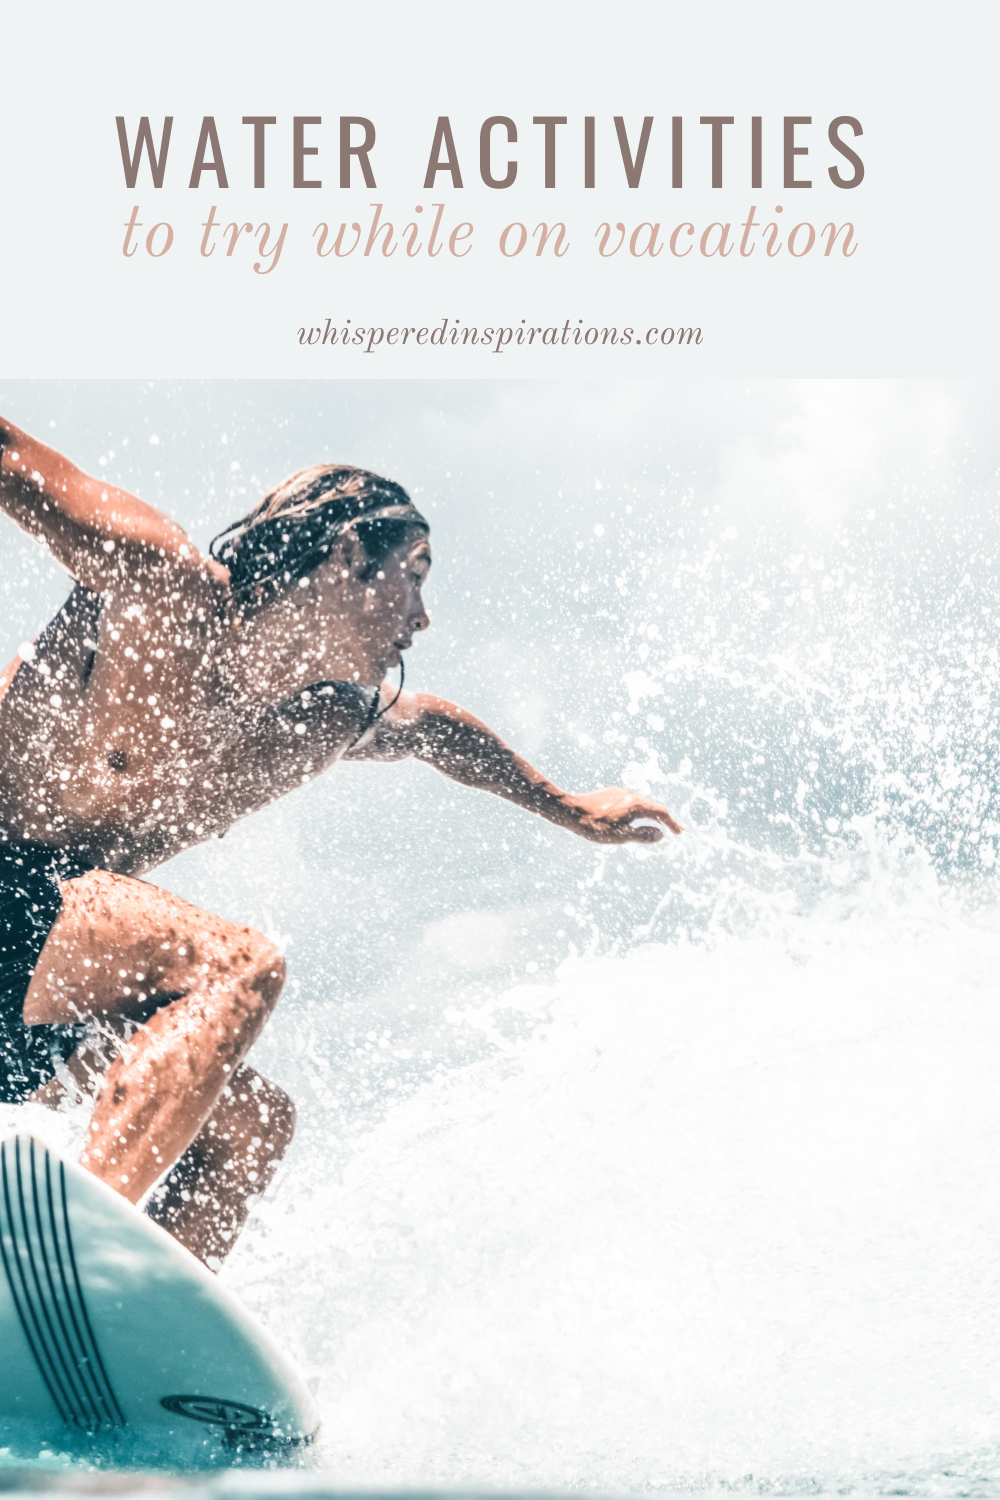 Young man surfing and catching a wave. This article covers water activities to enjoy while on vacation.